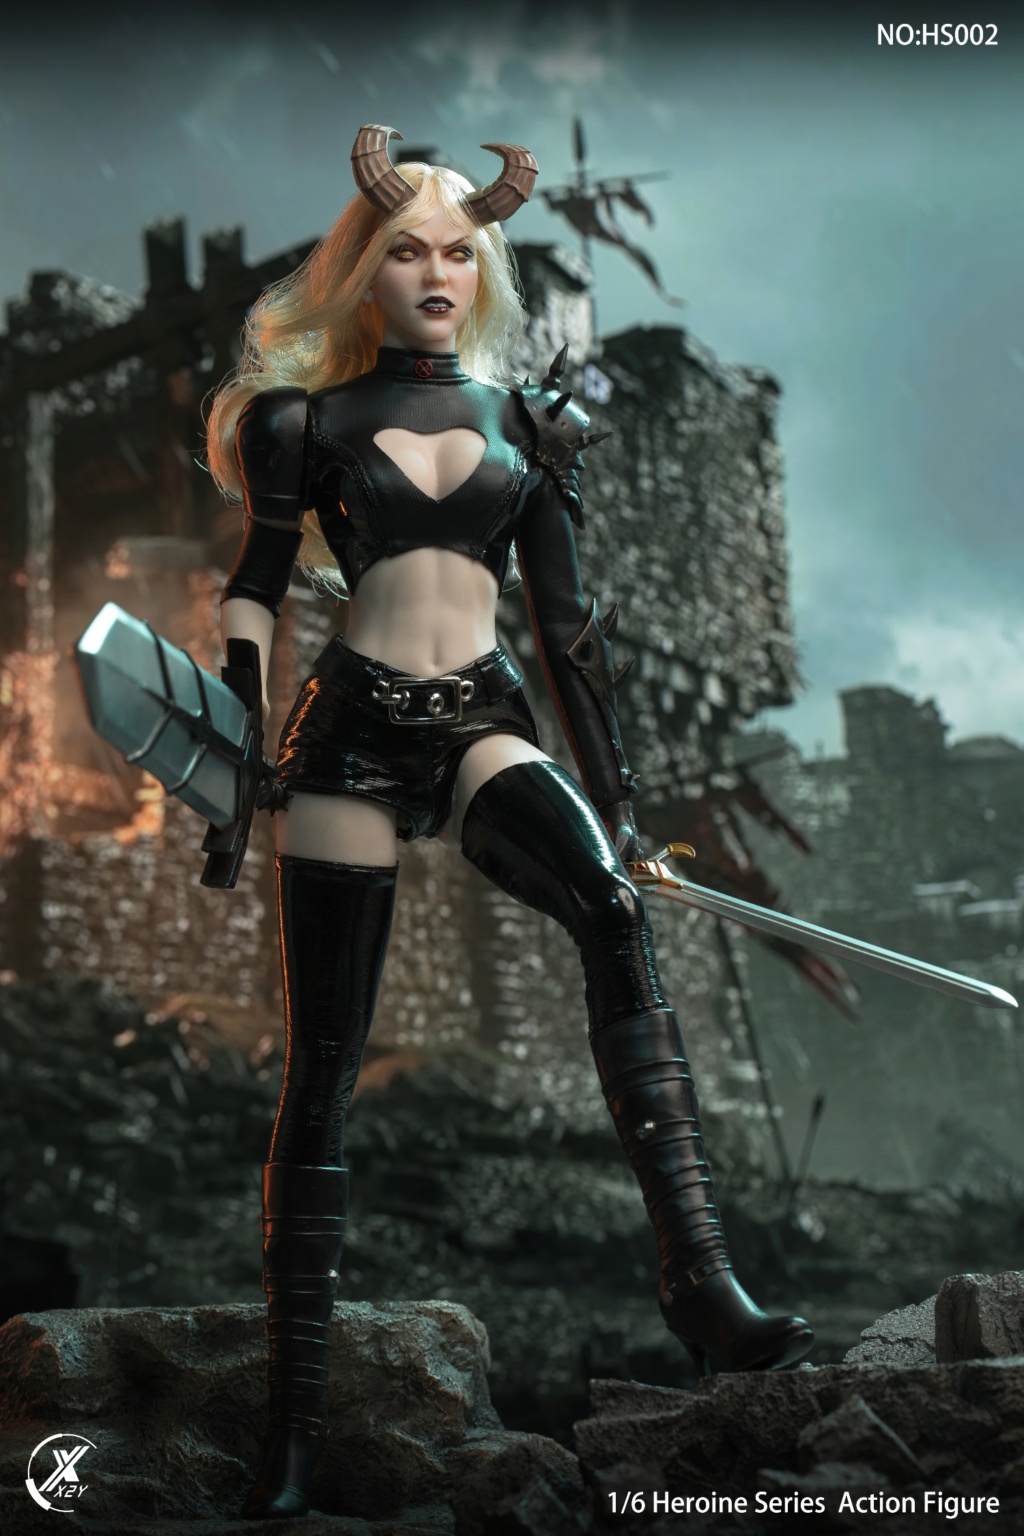 X2YToys - NEW PRODUCT: X2Y TOYS: 1/6 Heroine Series - Mysterious Female Warrior from Hell Double-Headed Female Doll # HS002 11200912